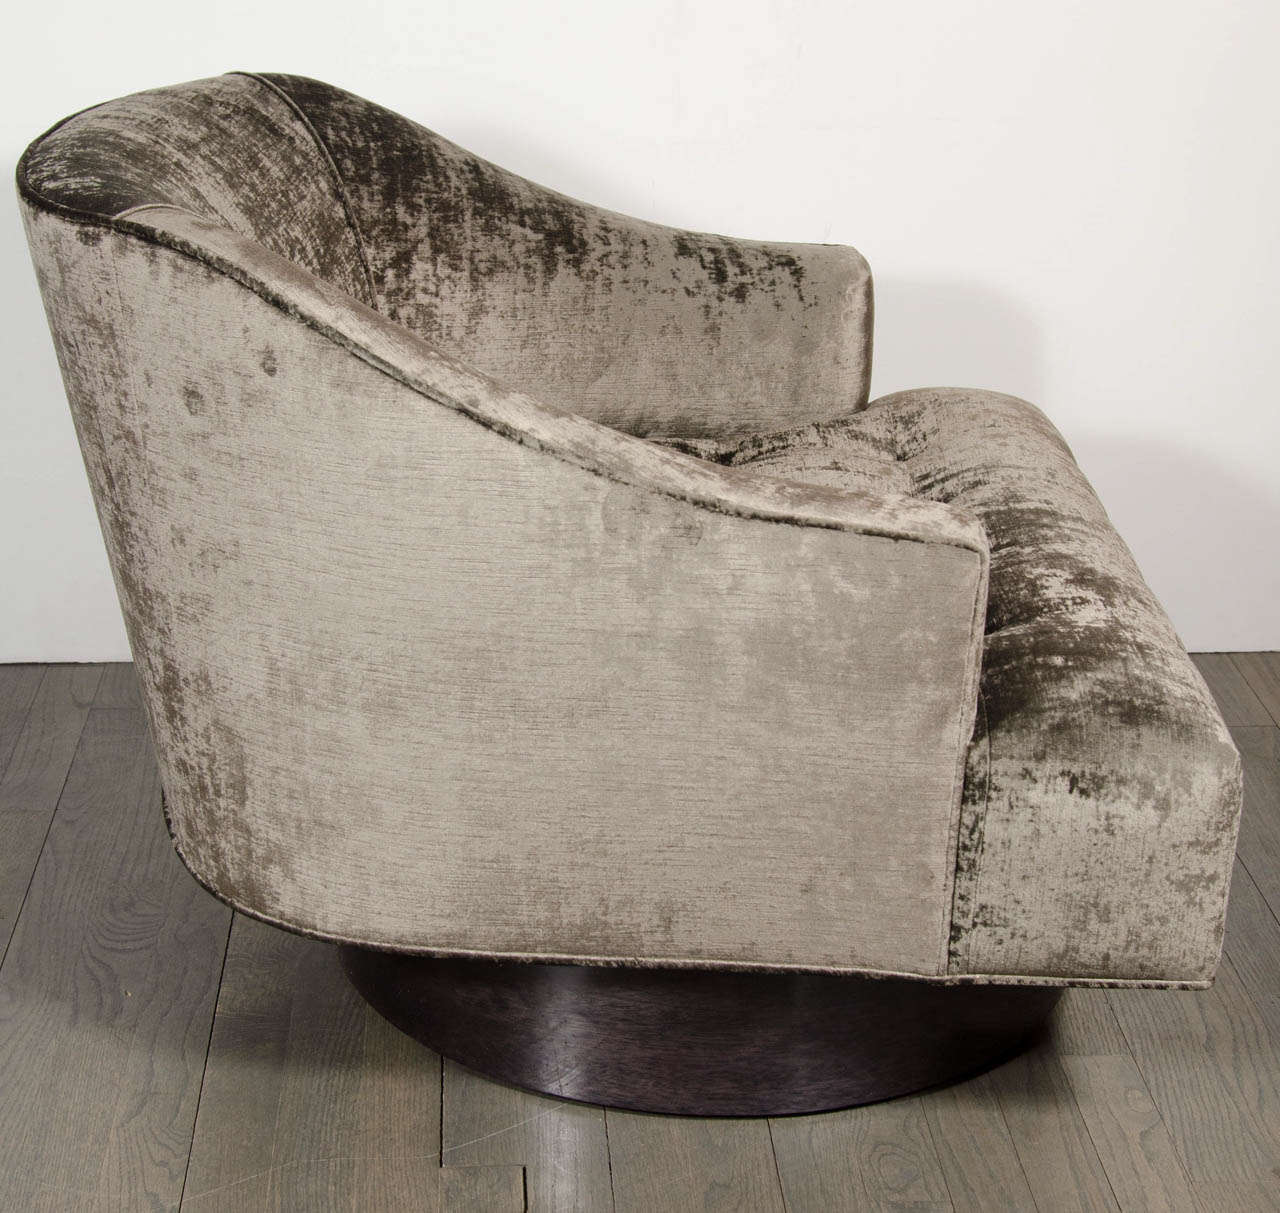 American Mid-Century Biscuit Tufted Swivel Chair by Milo Baughman in Lux Grey Velvet